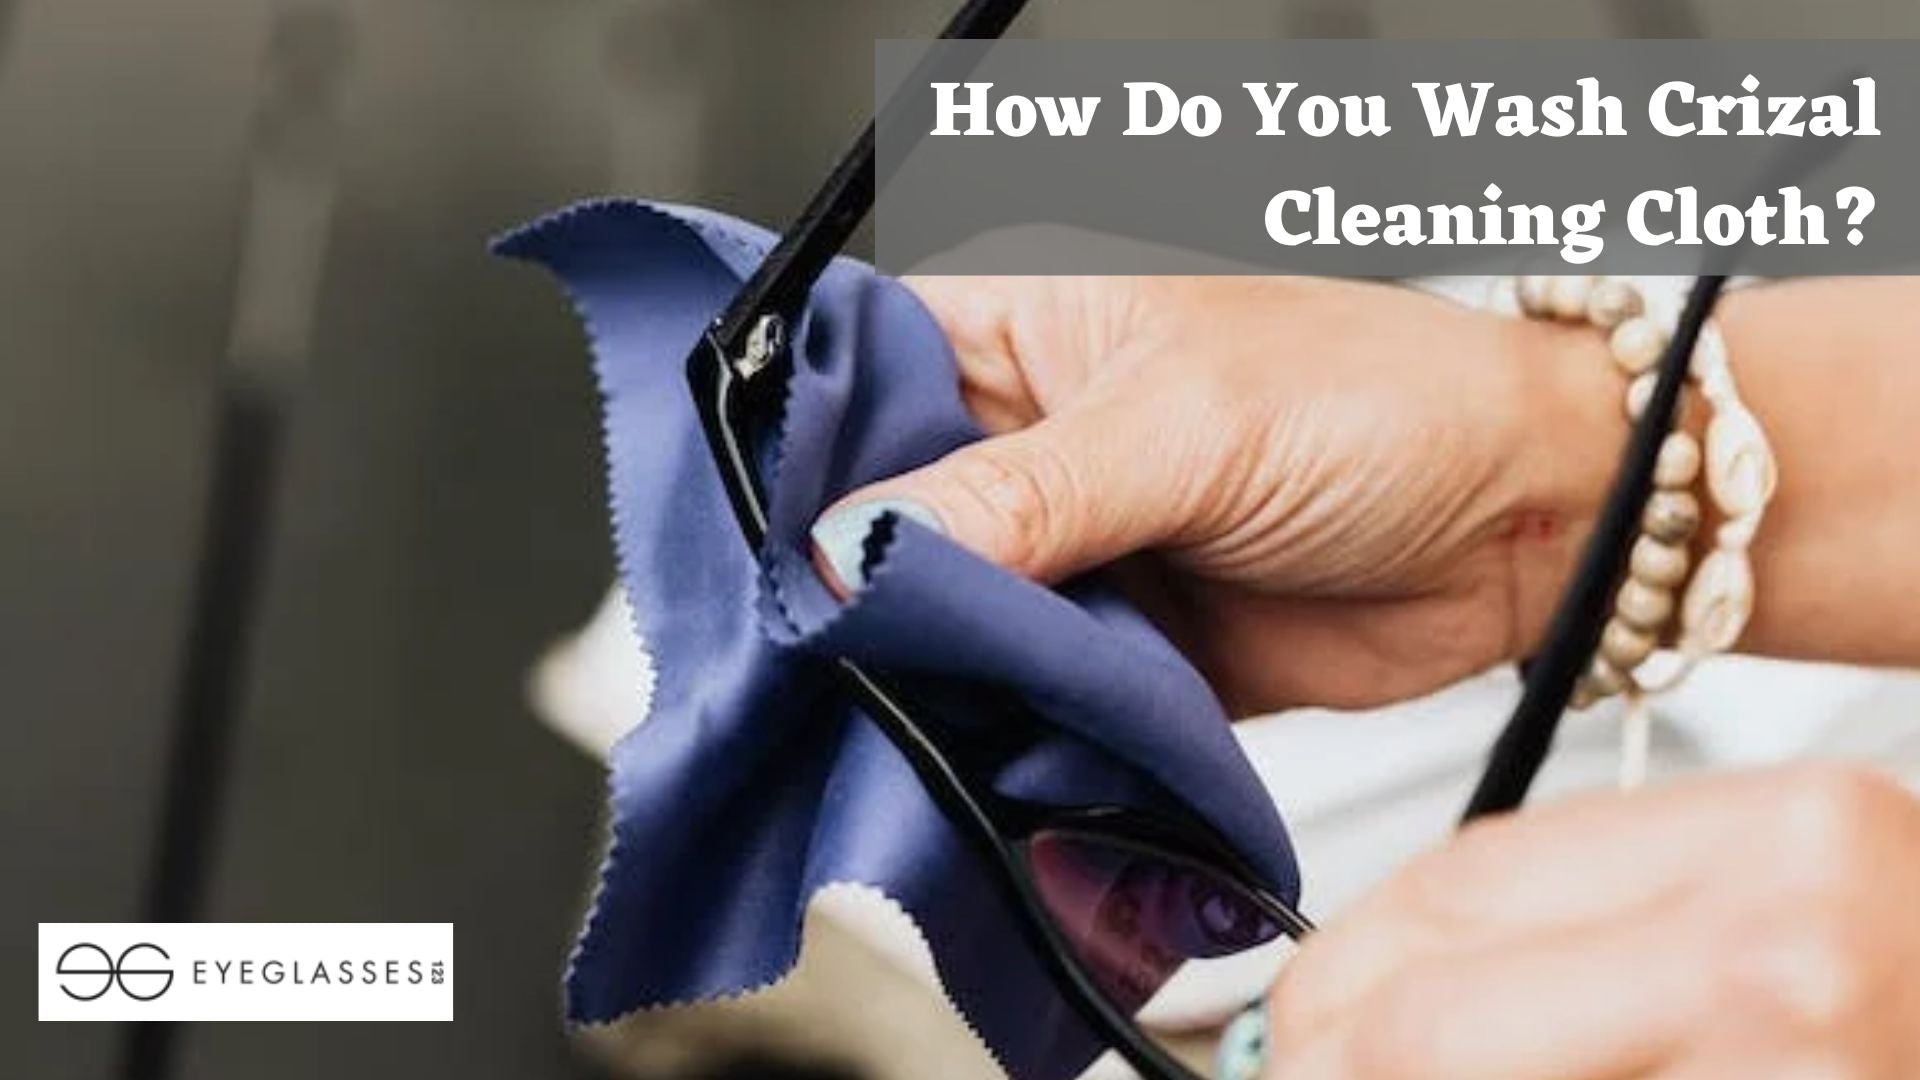 How Do You Wash Crizal Cleaning Cloth?